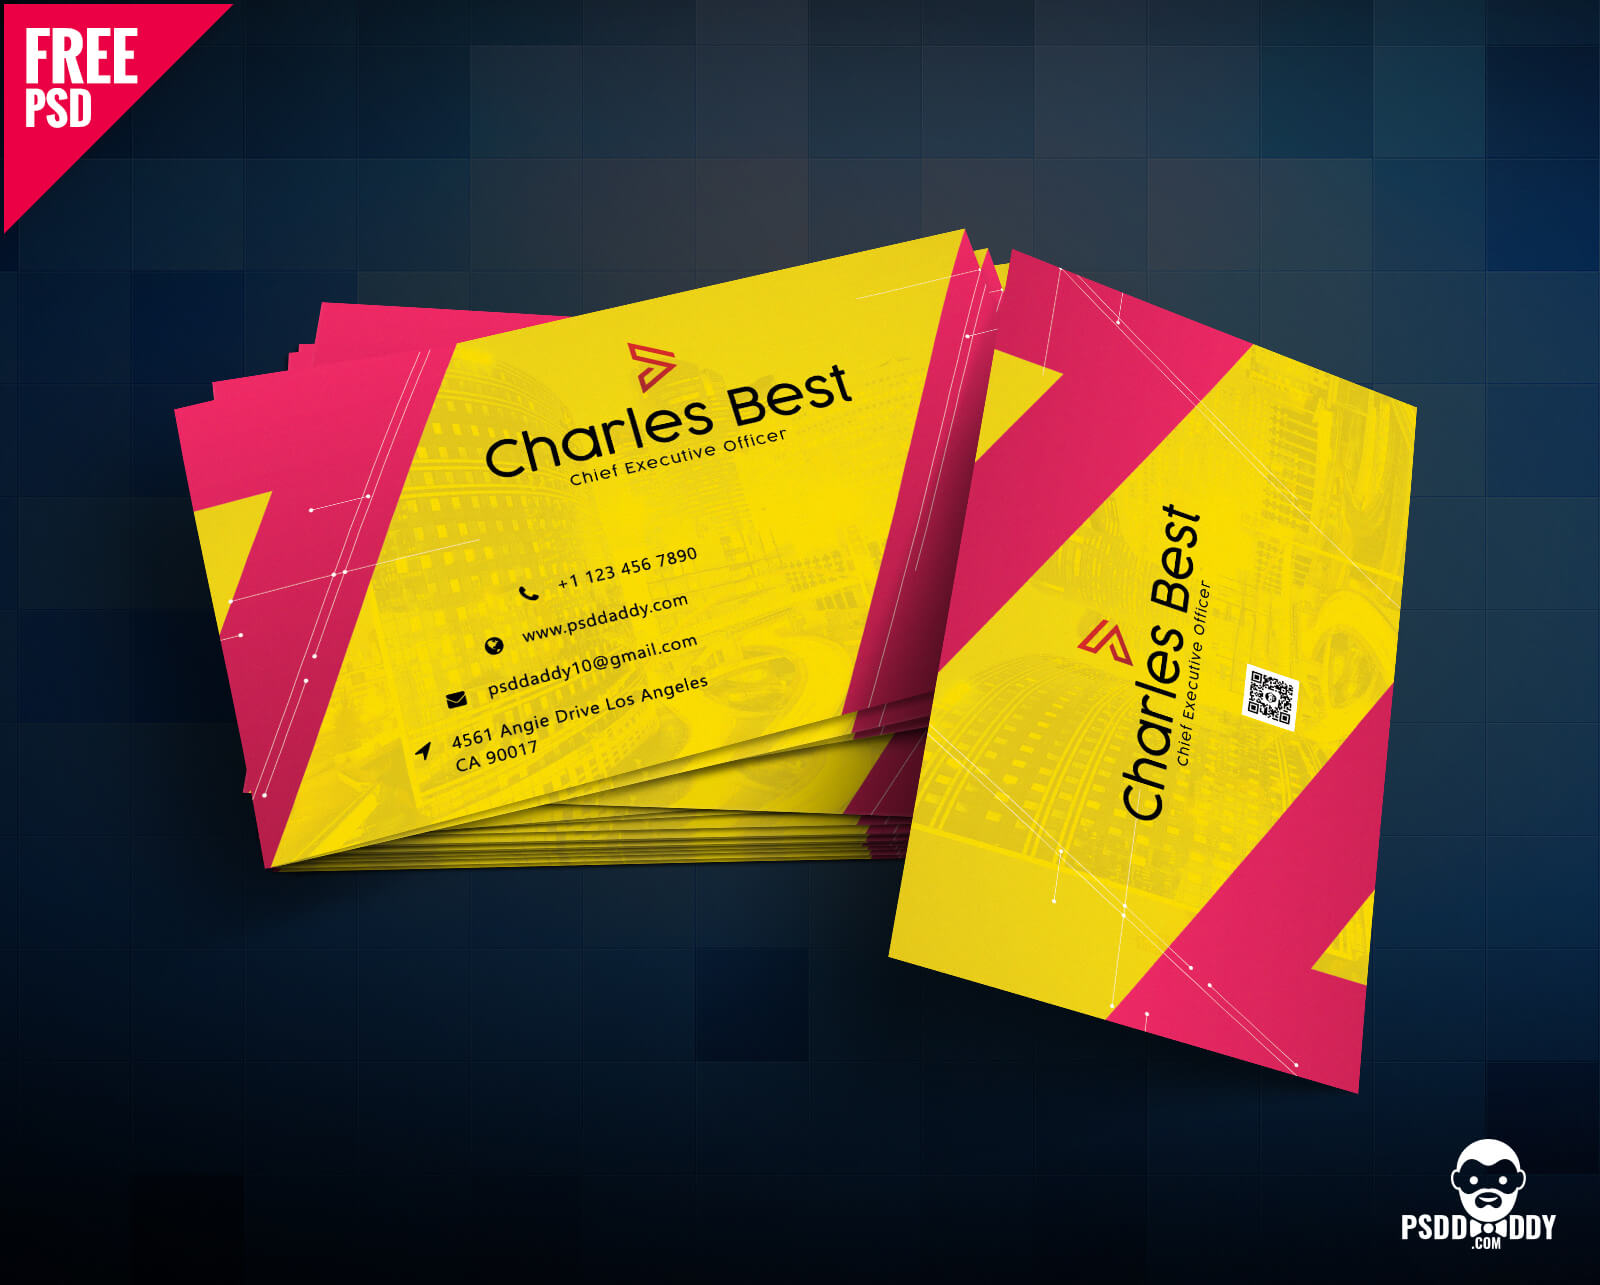 Download] Creative Business Card Free Psd | Psddaddy For Visiting Card Psd Template Free Download